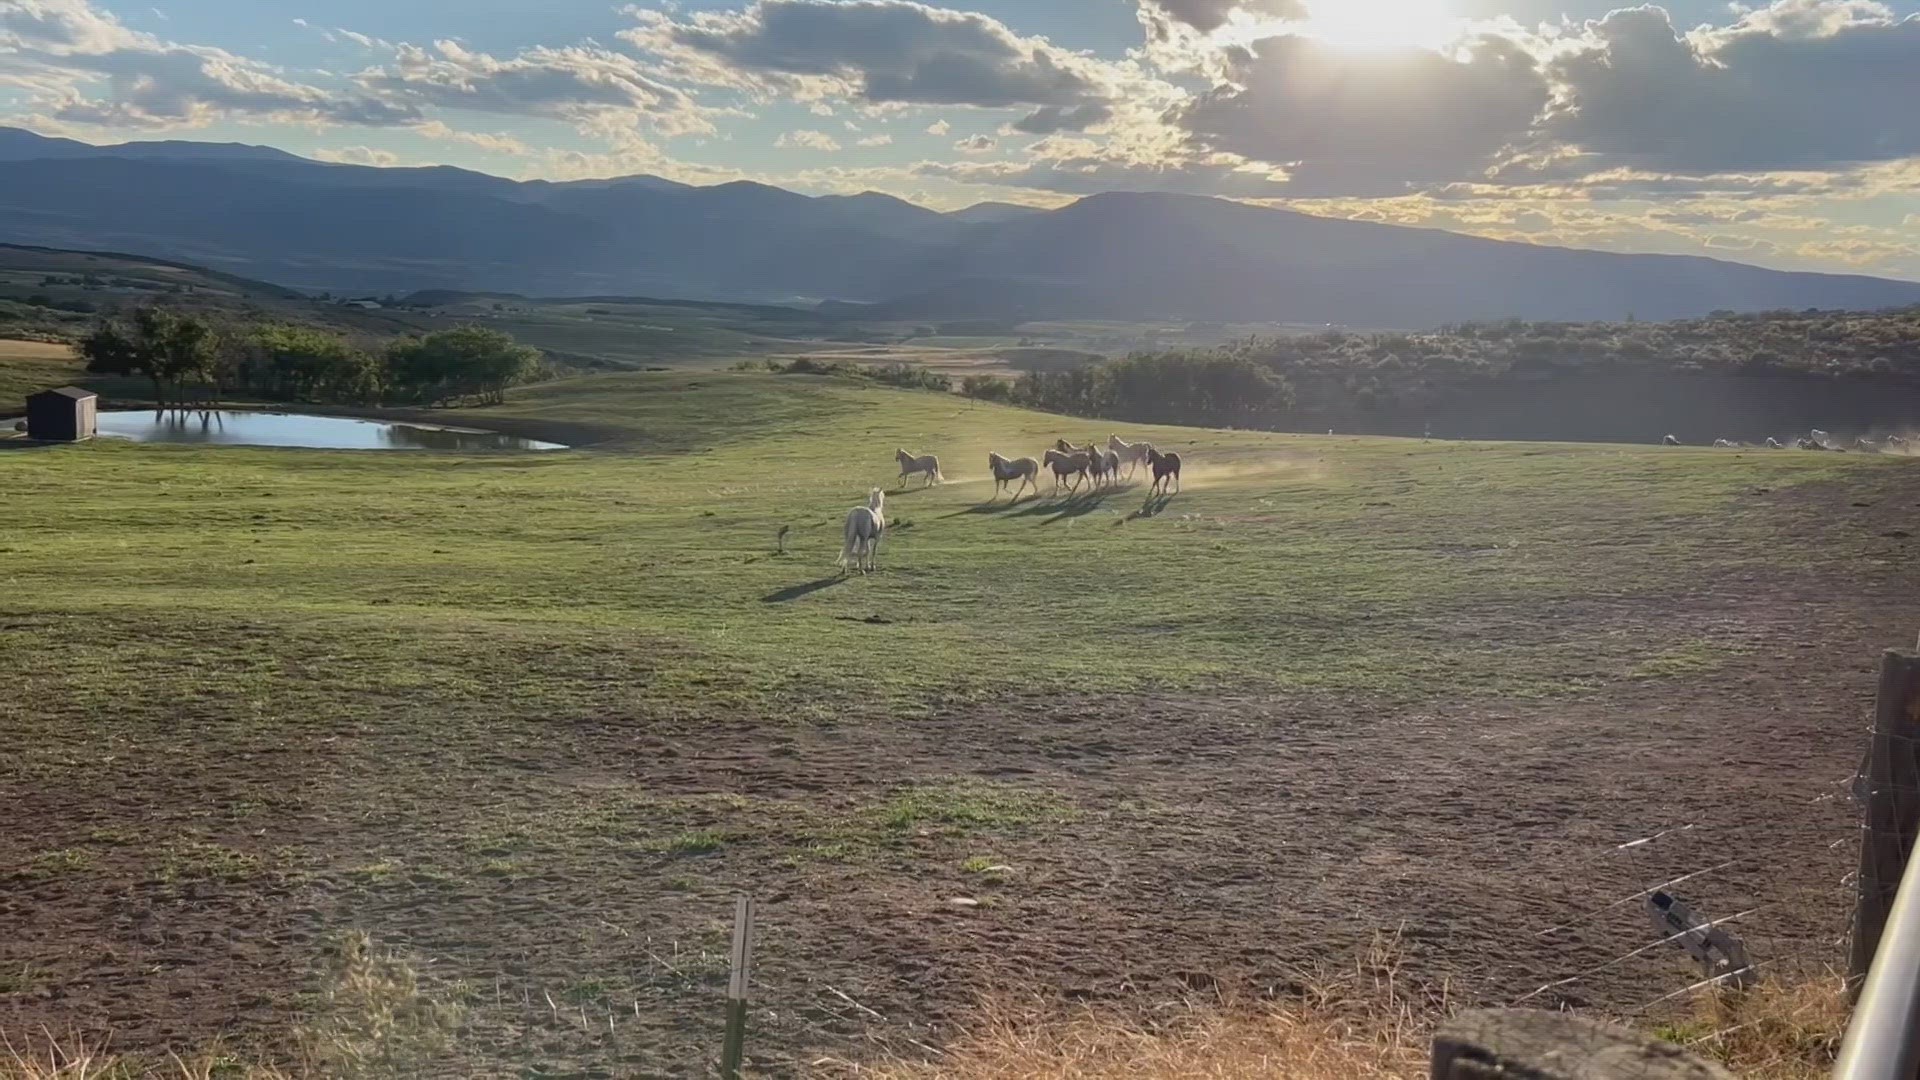 Sailor Moon is officially reunited with part of her herd, including her mom, at a ranch in Aspen, Colorado.